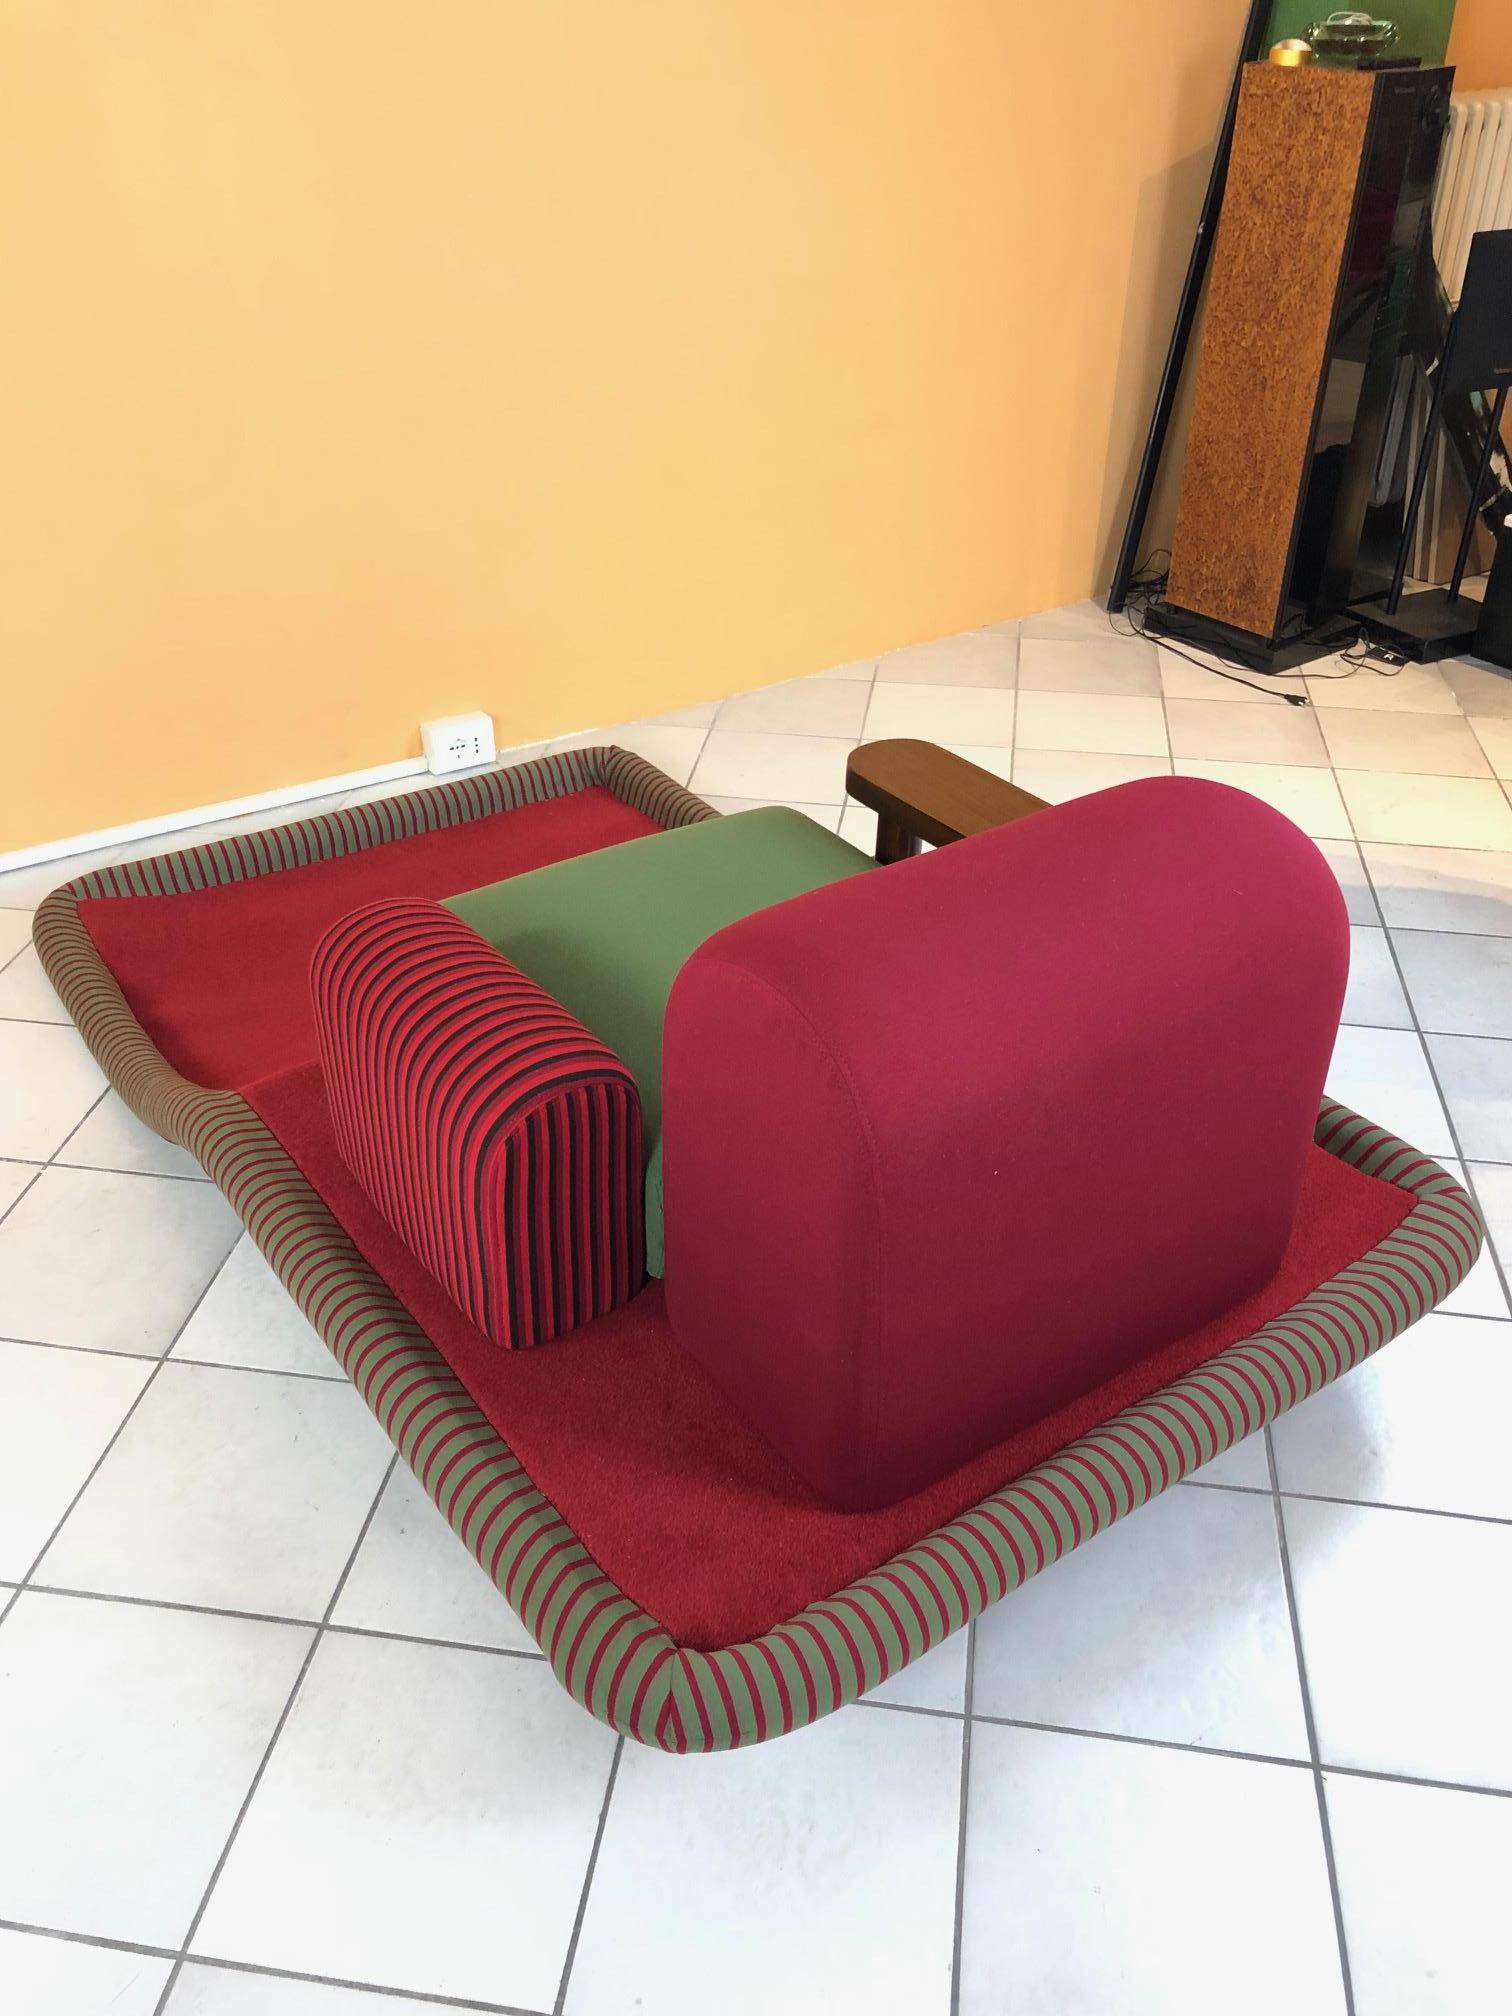 Fabric Ettore Sottsass “Tappeto Volante” Armchair for Bedding Brevetti, Italy, 1974 For Sale